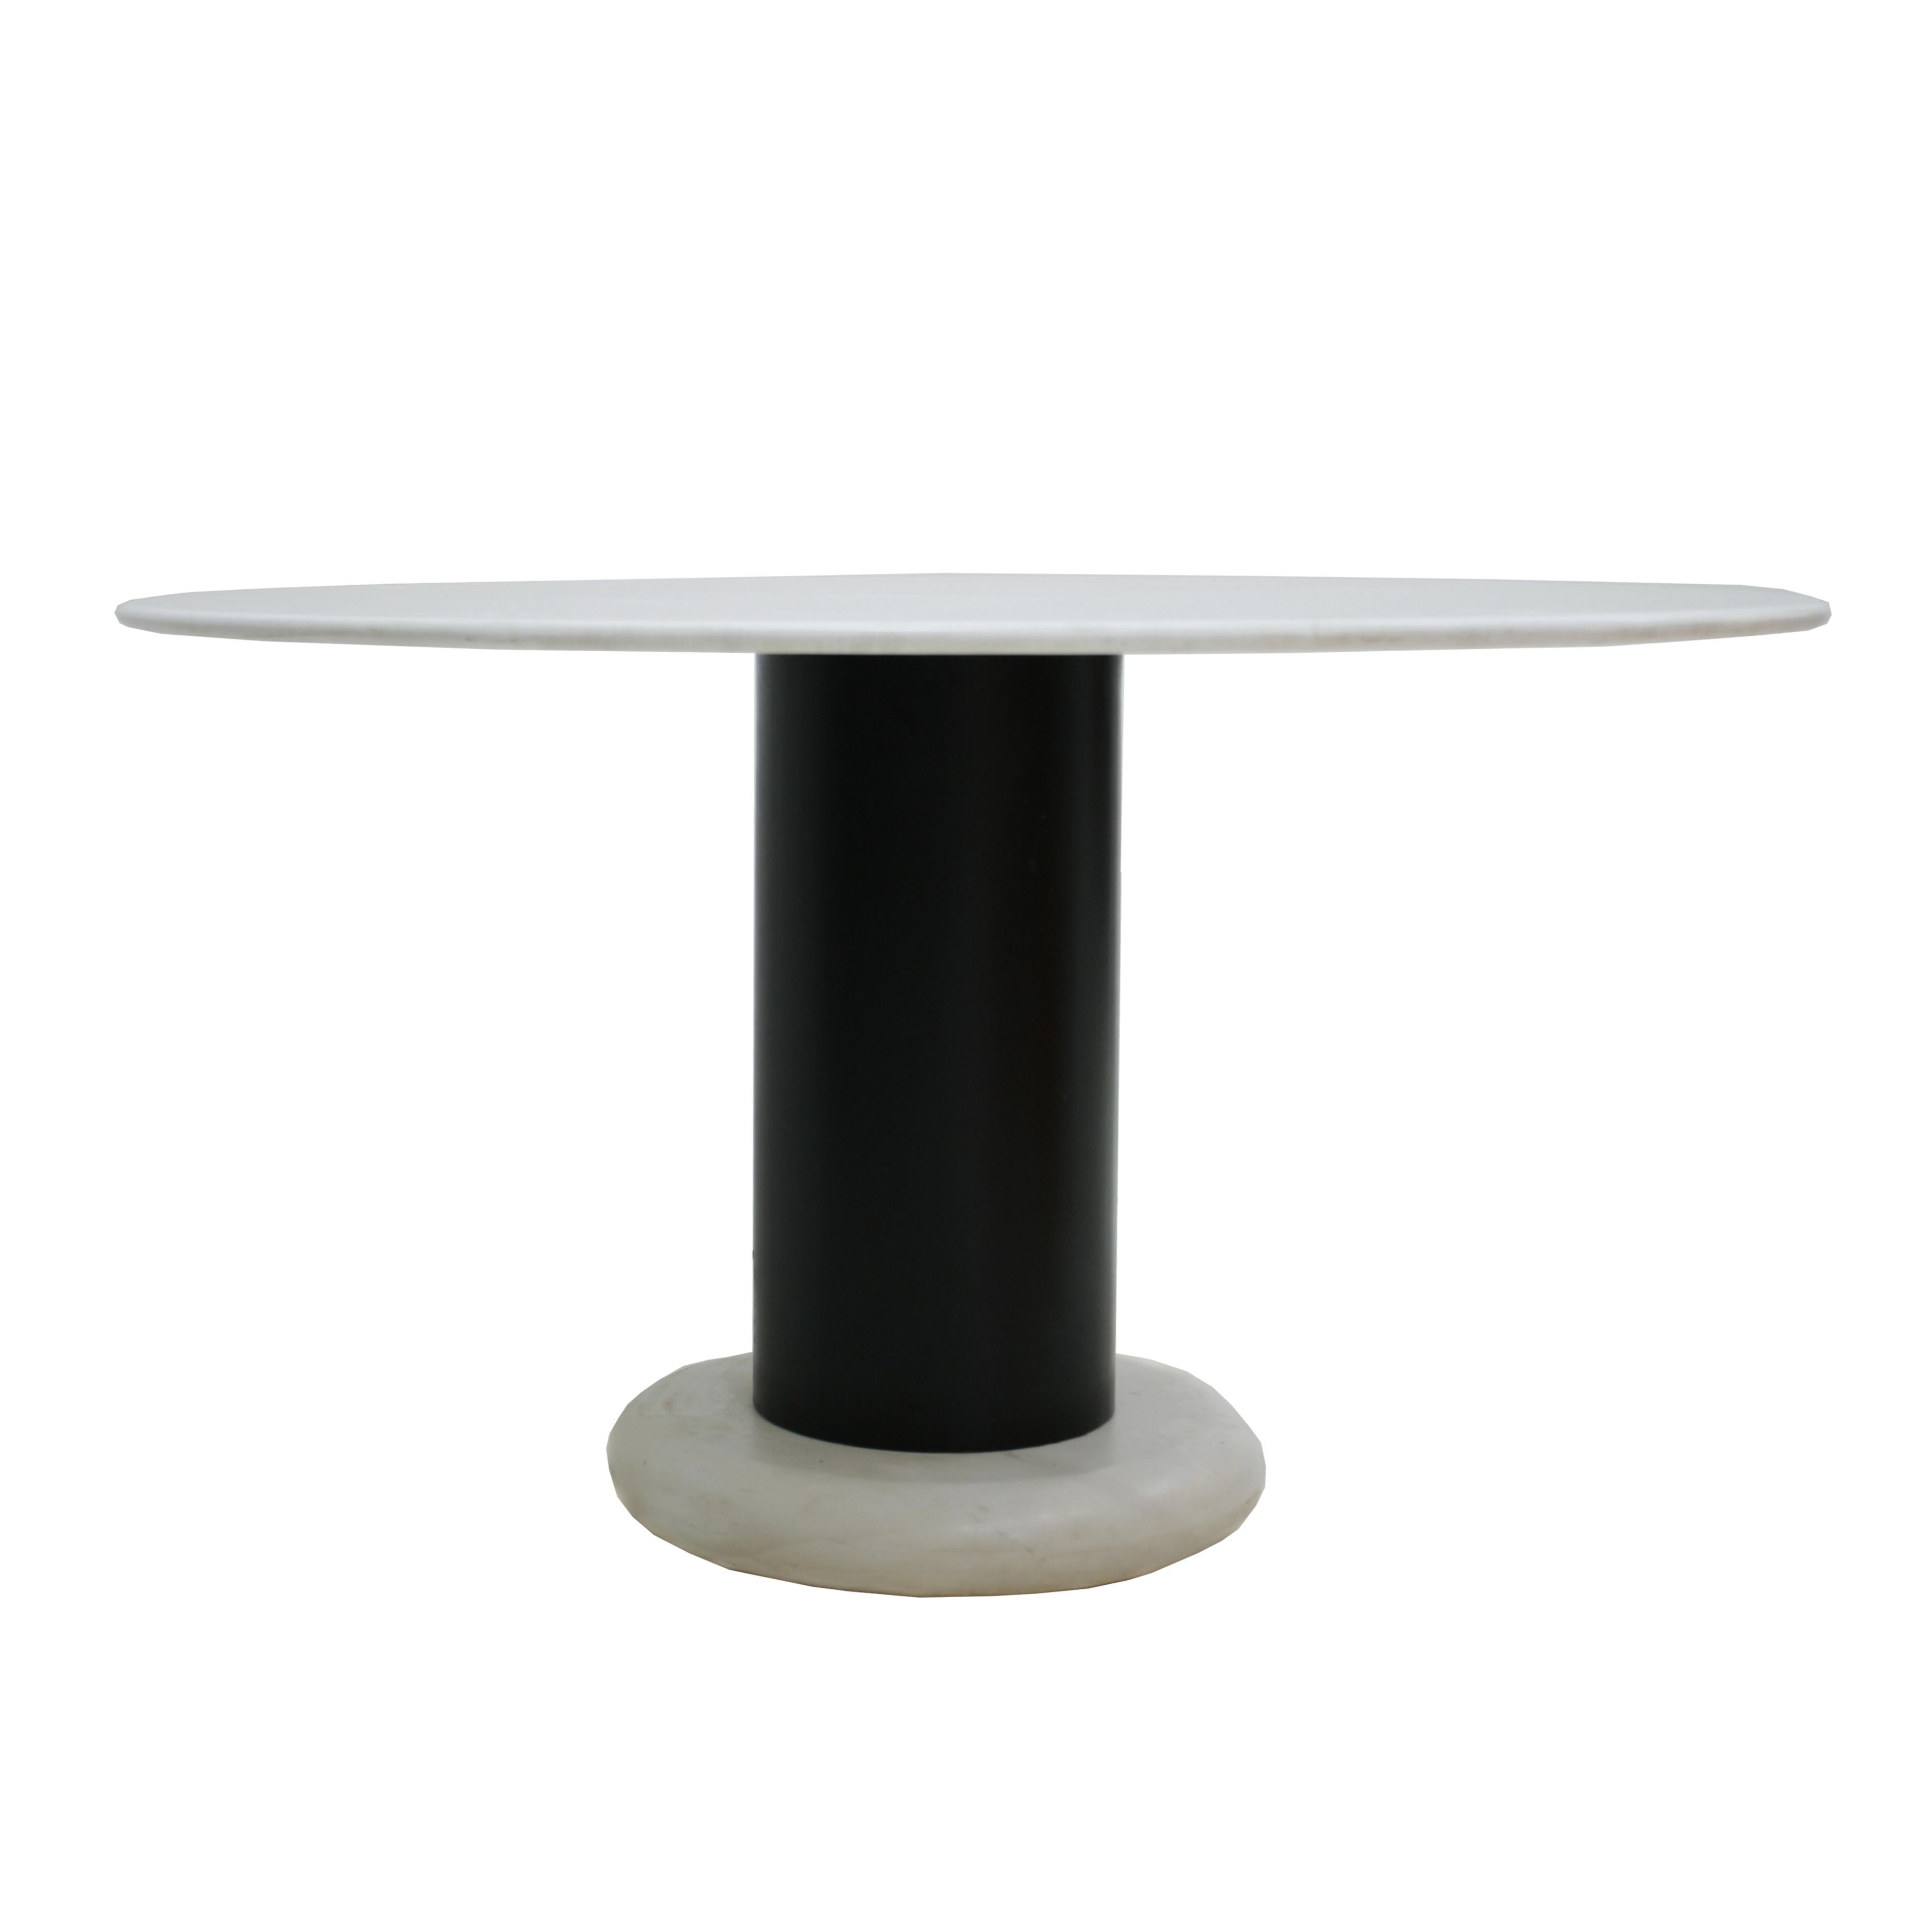 An iconic and beautiful circular table model 